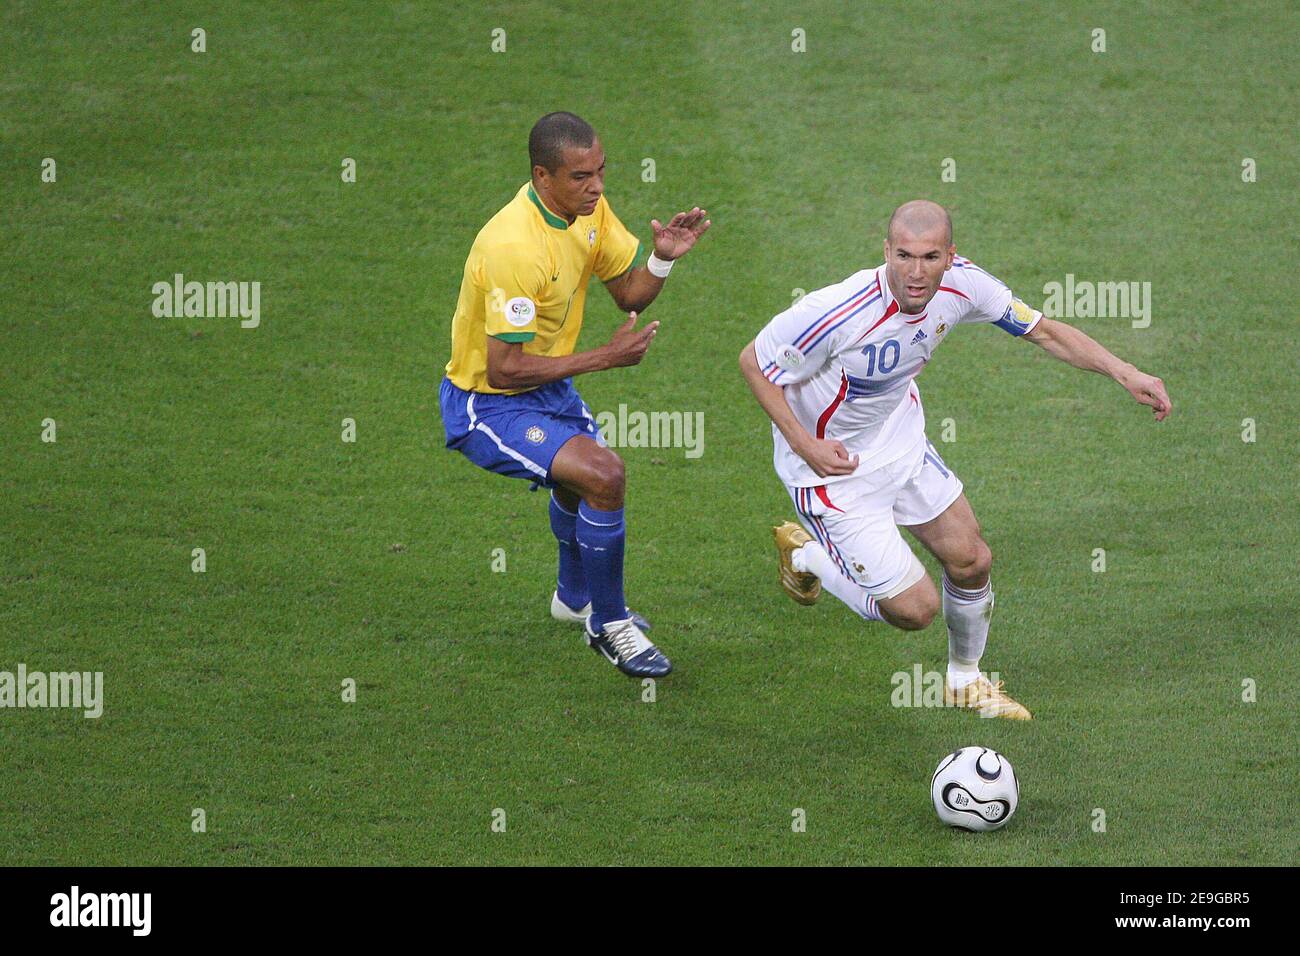 Brazil's Gilberto Silva and France's Zinedine Zidane battle for the ball during the World Cup 2006, quater-final, Brazil vs France at the Commerzbank-Arena stadium in Frankfurt, Germany on July 1, 2006. France won 1-0 and advances to World Cup semifinals. Photo by Gouhier-Hahn-Orban/Cameleon/ABACAPRESS.COM Stock Photo